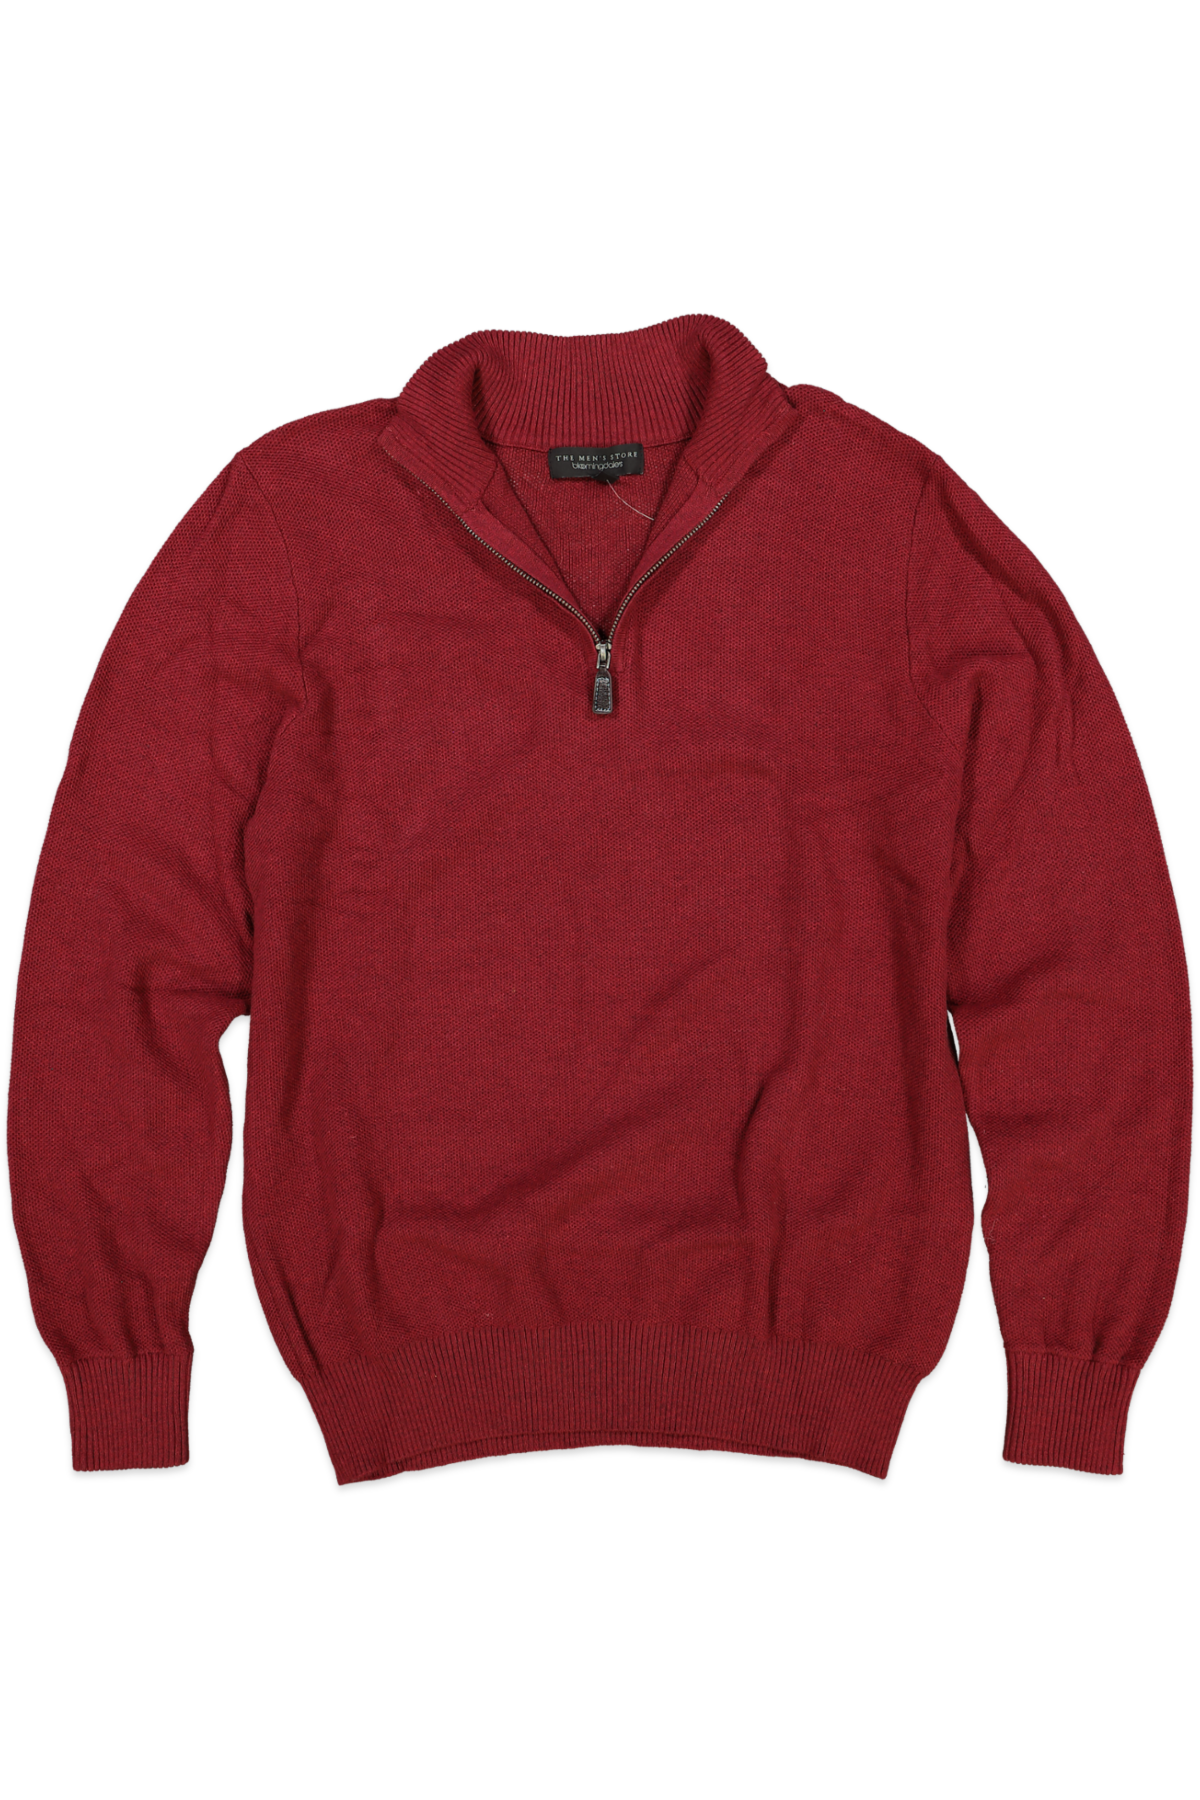 THE MENS STORE RED WINE SWEATER